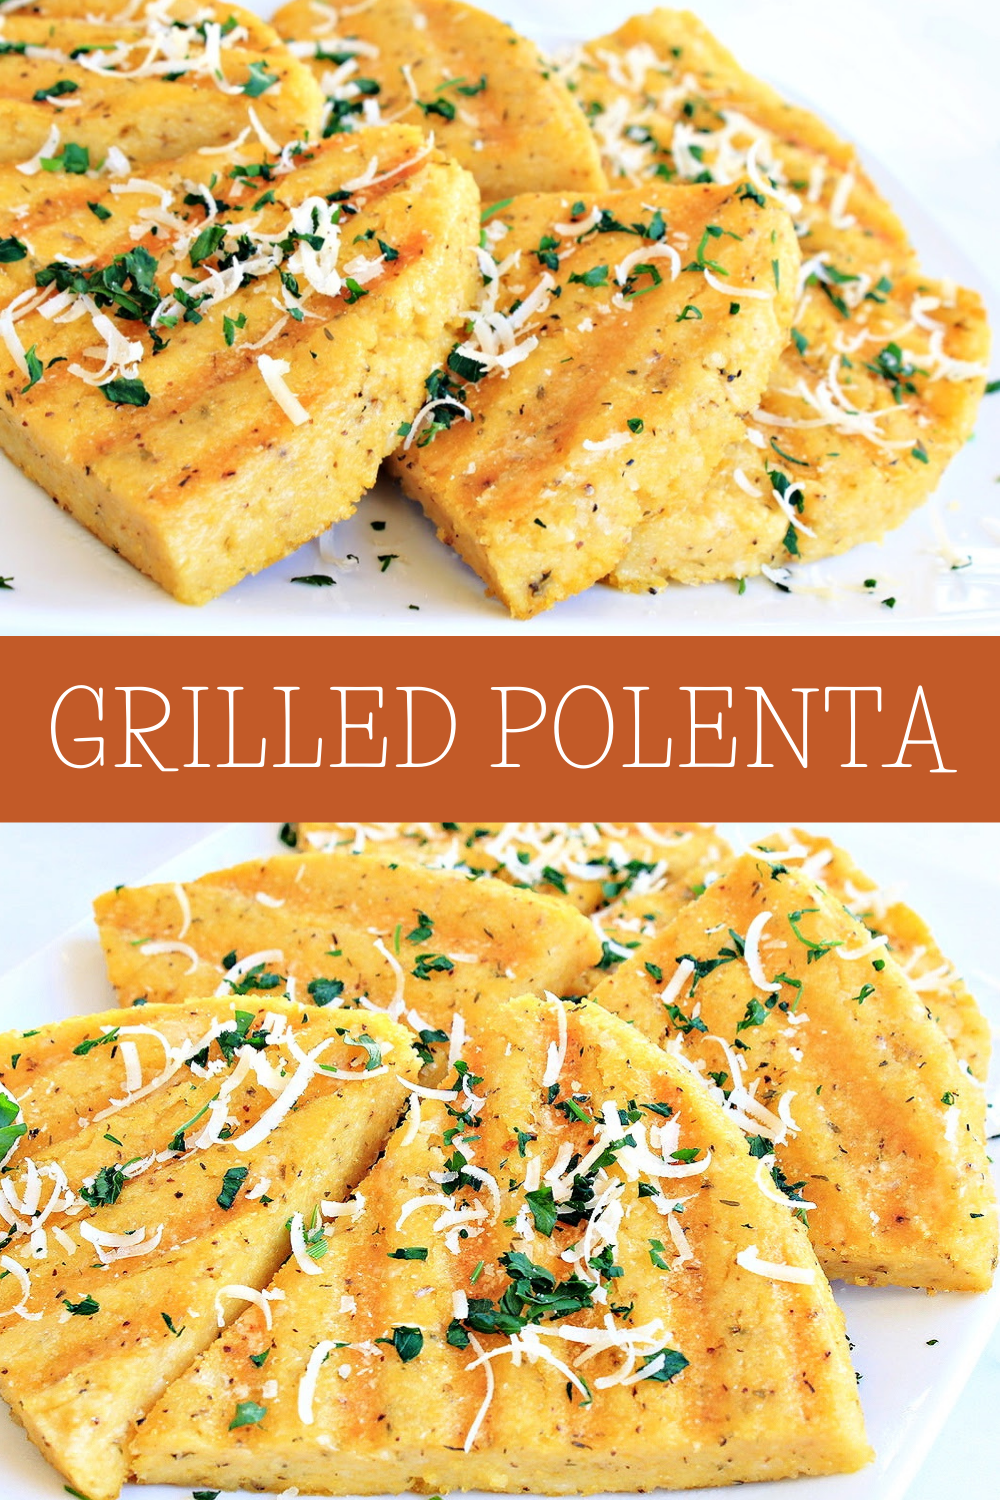 Grilled Polenta ~ Lightly seared on the outside, creamy on the inside, & loaded with savory flavor! An easy & satisfying main course or side. via @thiswifecooks